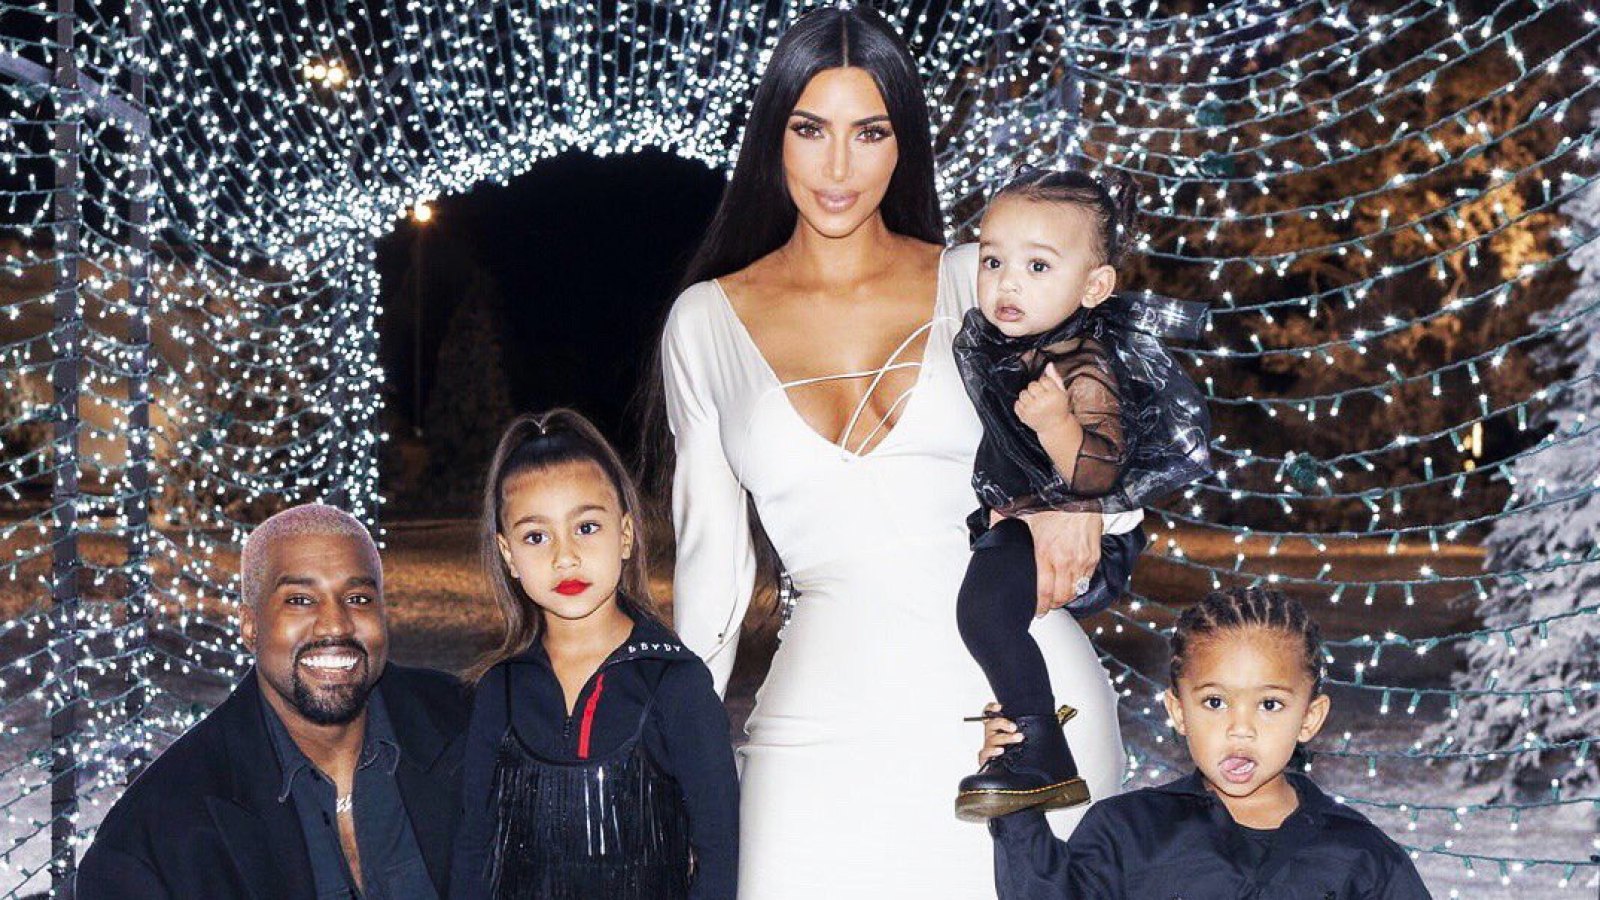 Kim Kardashian Proves Daughter North Can Fall Asleep Anywhere in Adorable Pic With Kanye West